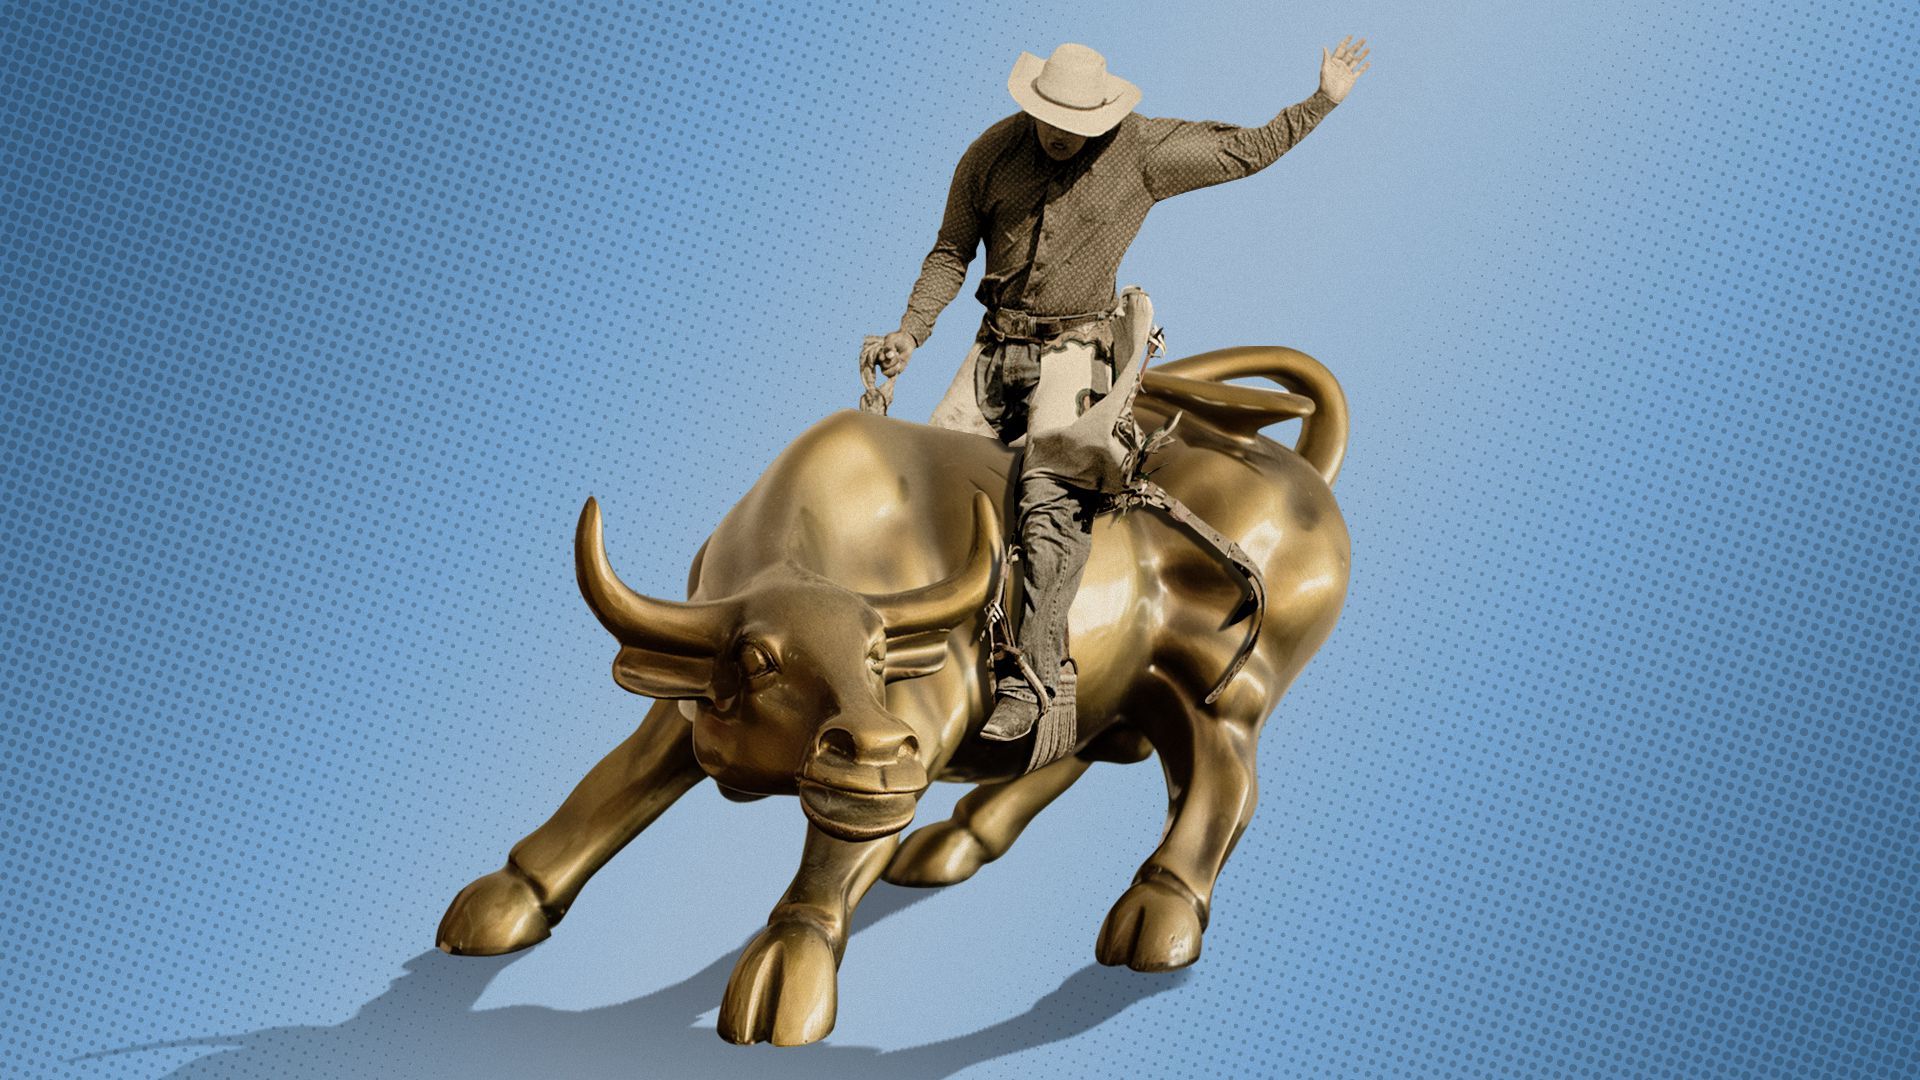 Illustration of a cowboy riding the wall street bull statue.